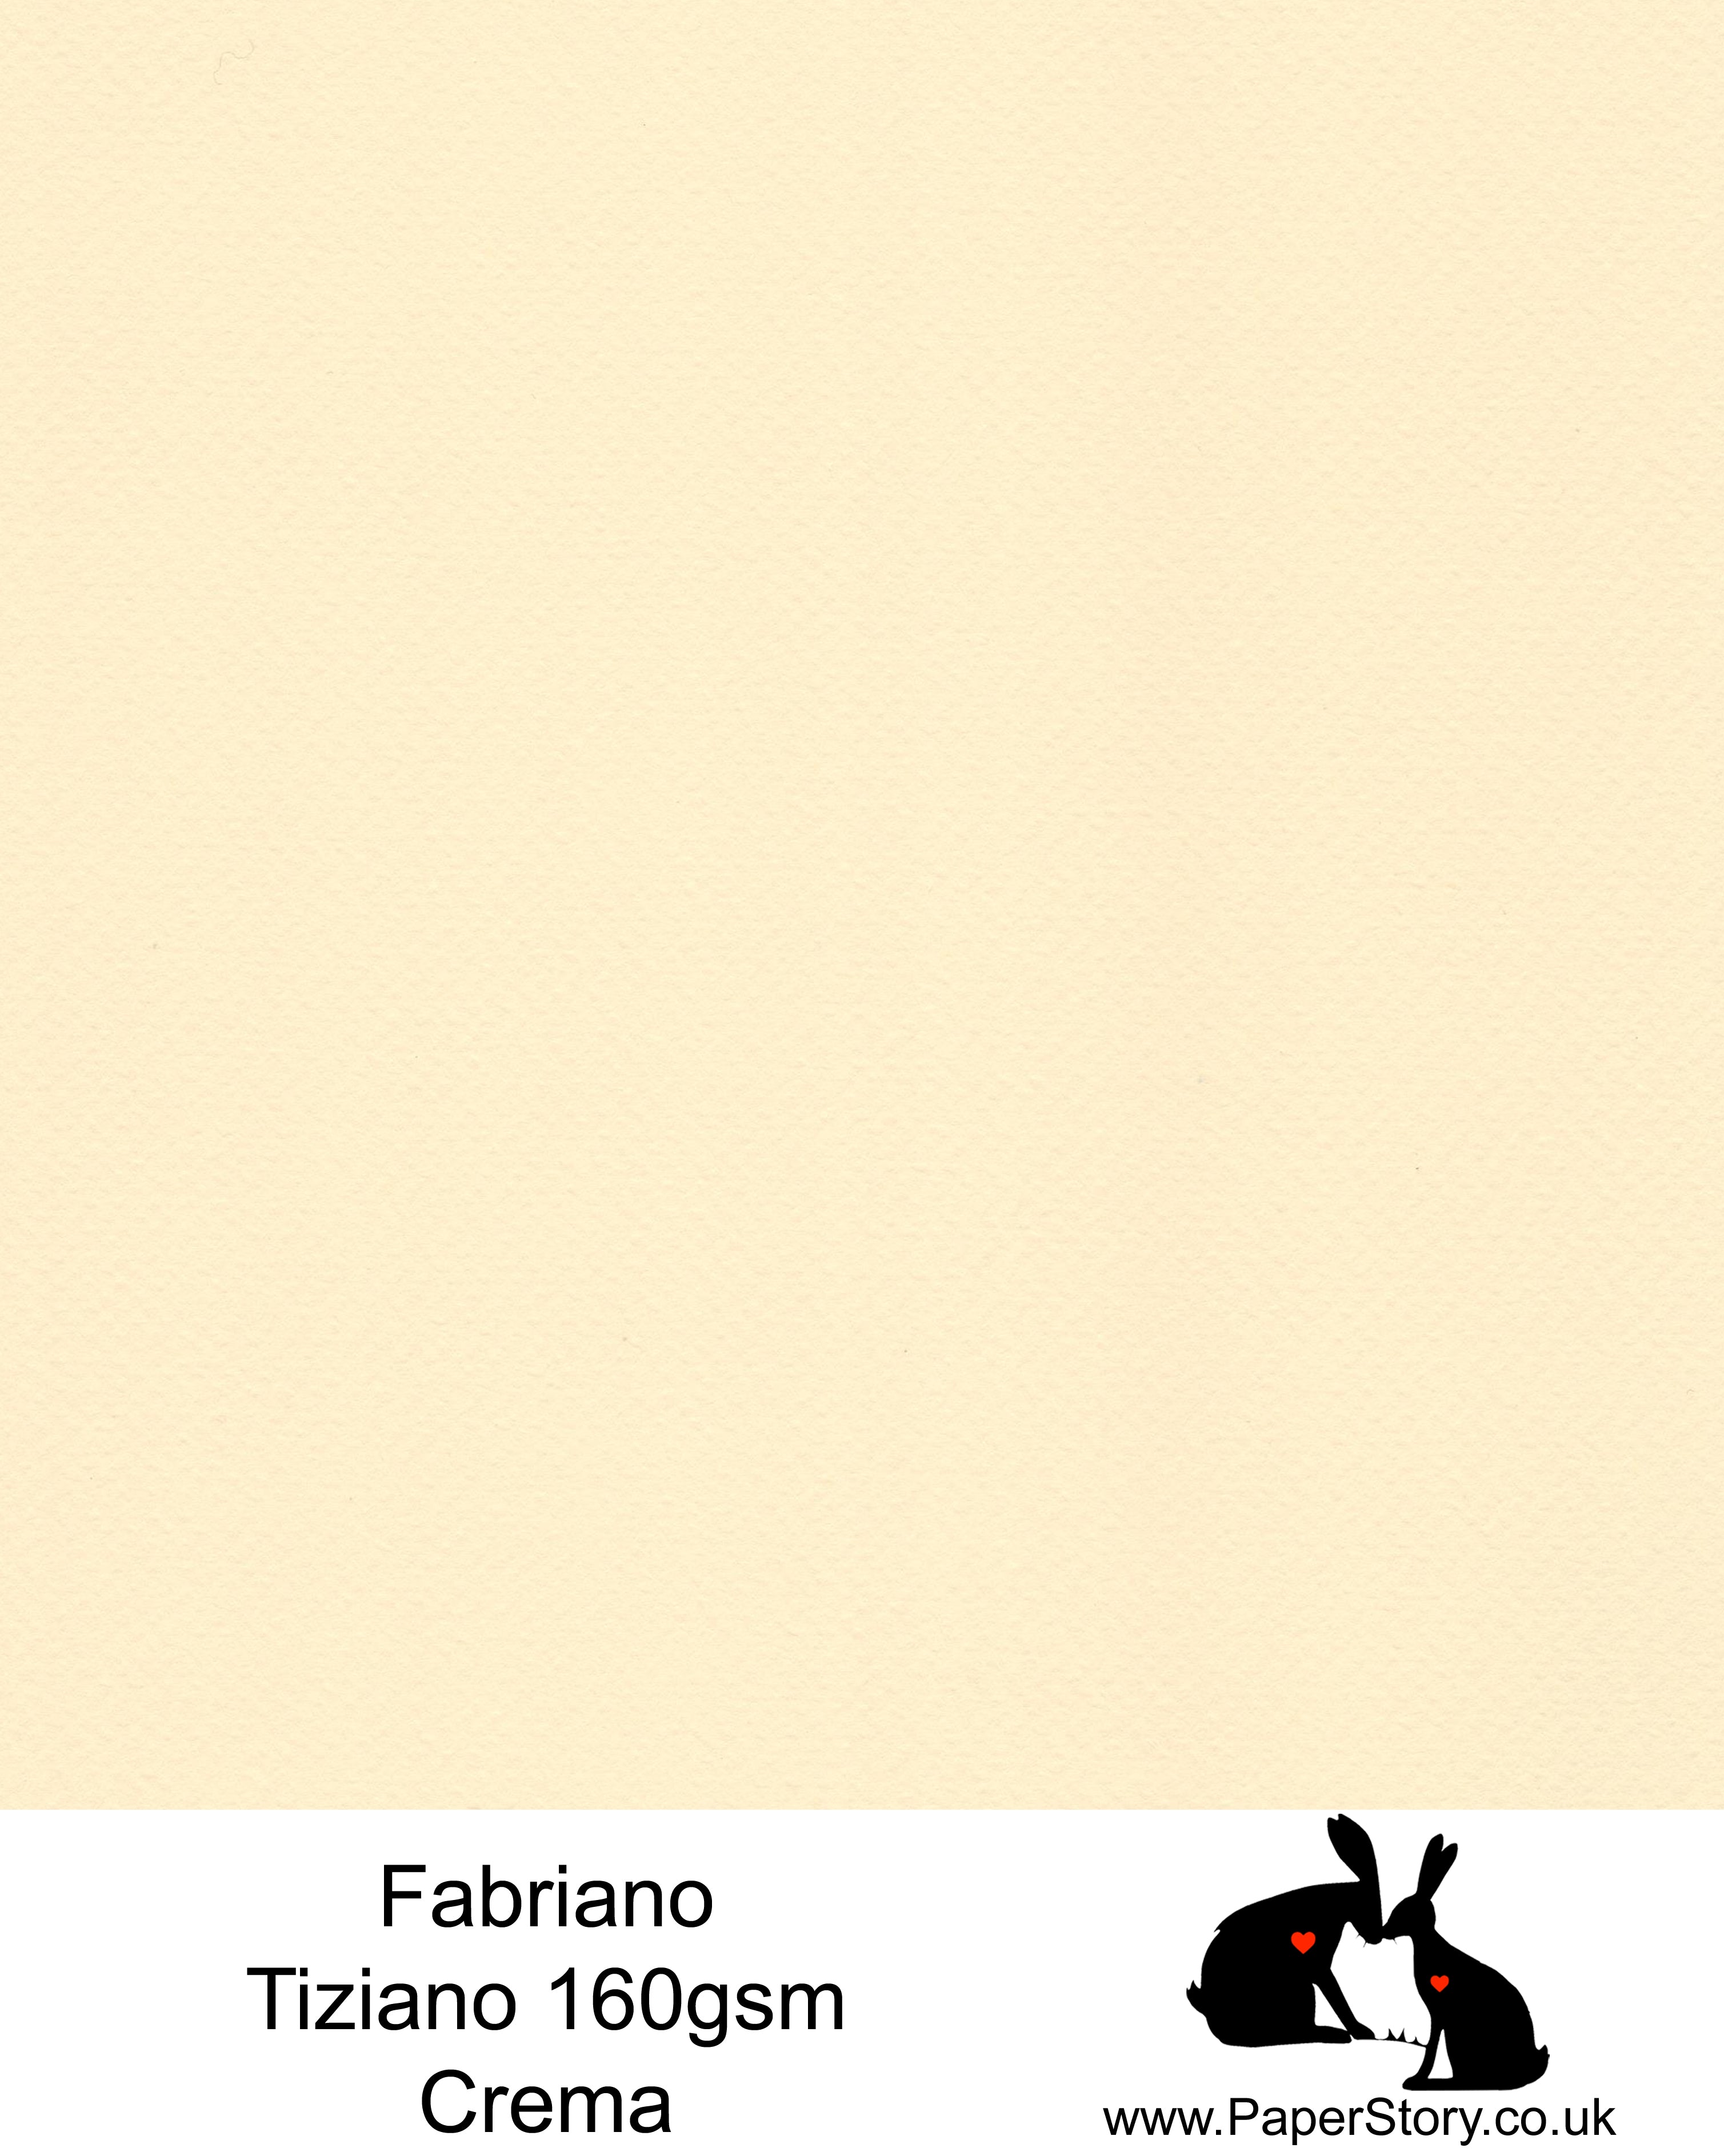 High quality paper from Italy, Crema fresh cream Fabriano Tiziano is 160 gsm, Tiziano has a high cotton content, a textured naturally sized surface. This paper is acid free to guarantee long permanence in time, pH neutral. It has highly lightfast colours, an excellent surface making and sizing which make this paper particularly suitable for papercutting, pastels, pencil, graphite, charcoal, tempera, air brush and watercolour techniques. Tiziano can be used for all printing techniques